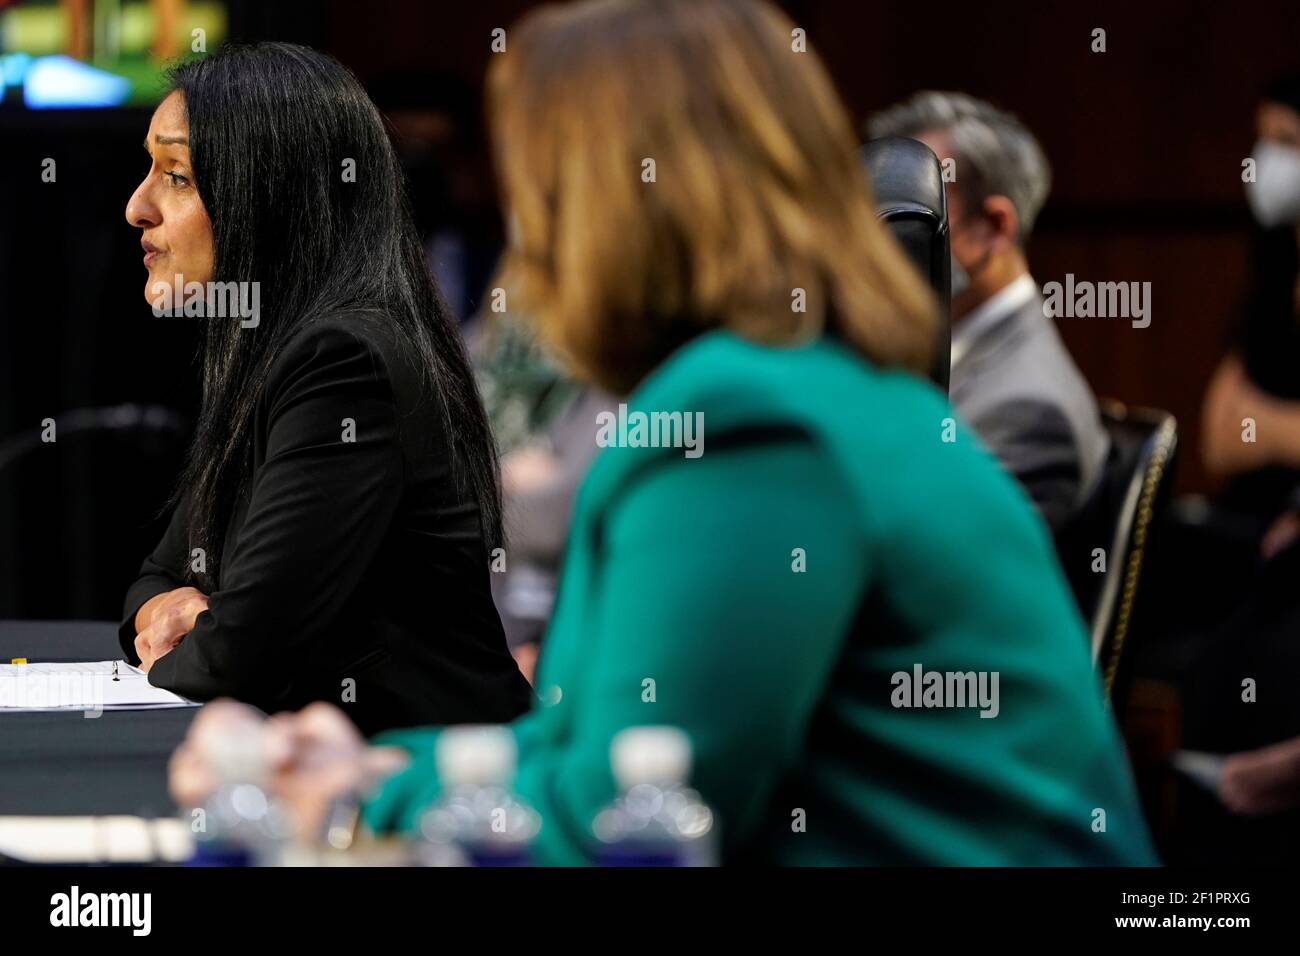 Nominee to be Associate Attorney General Vanita Gupta testifies as Nominee to be Deputy Attorney General Lisa Monaco listens during their confirmation hearing before the Senate Judiciary Committee on Capitol Hill in Washington, U.S., March 9, 2021. REUTERS/Joshua Roberts Stock Photo